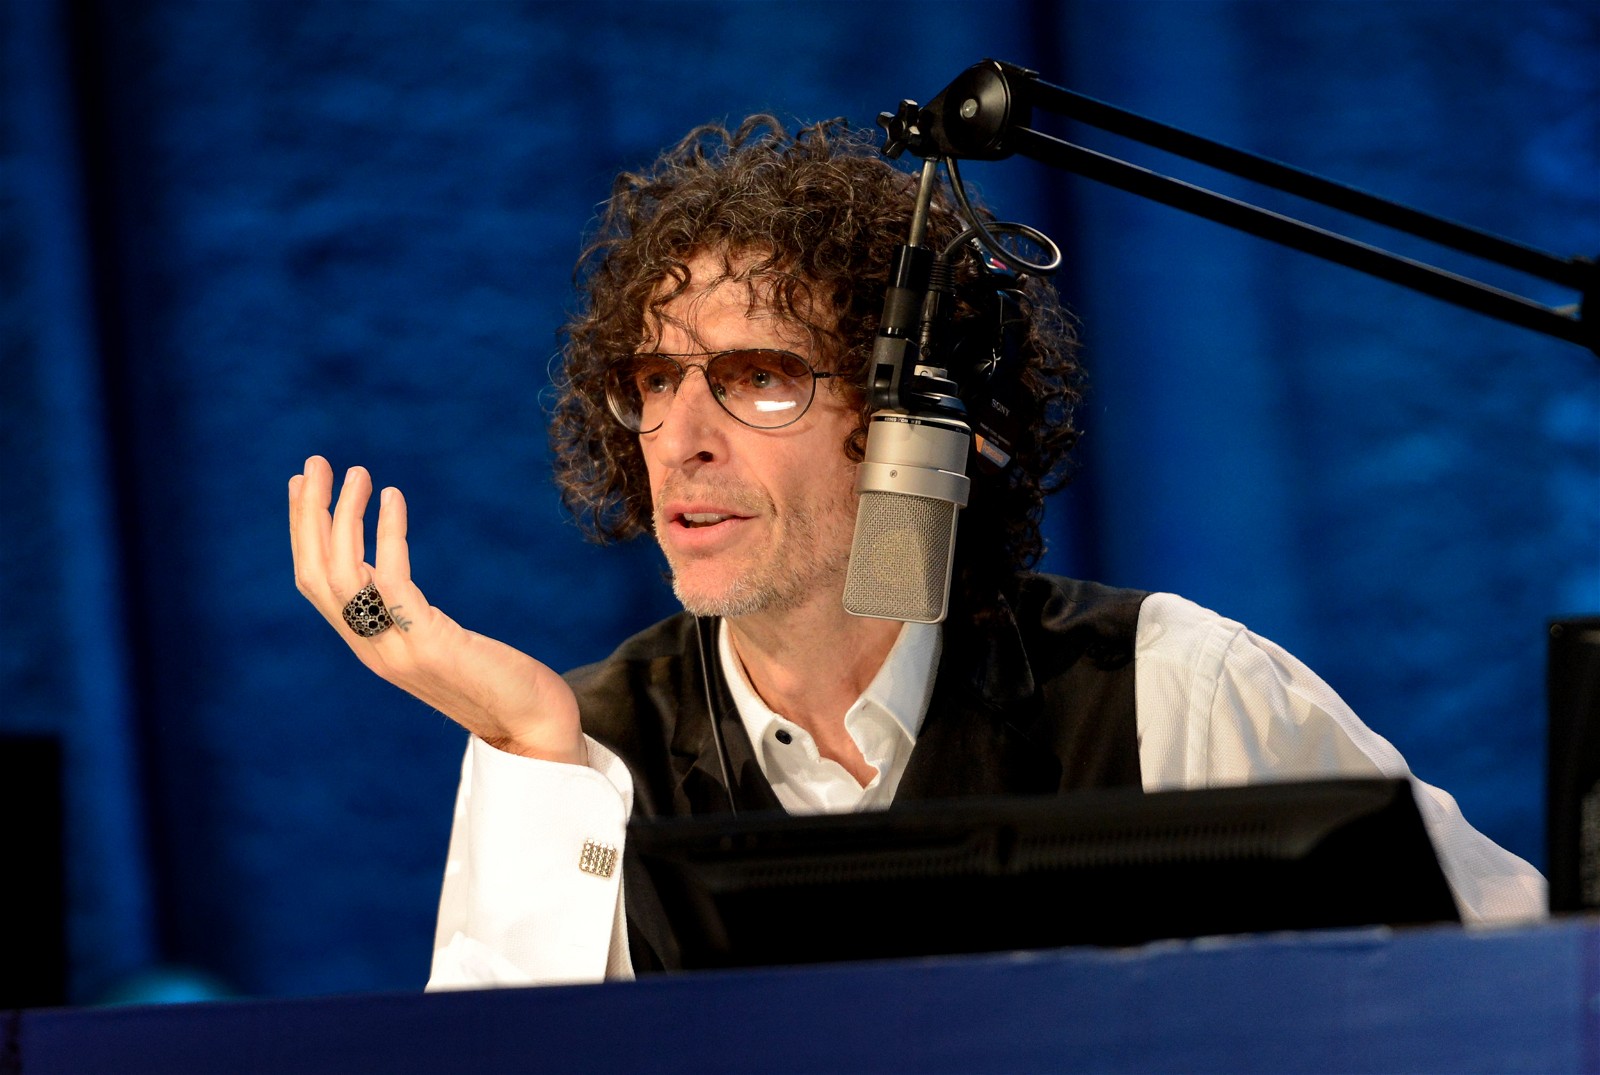 Howard Stern reflected on his past behavior...